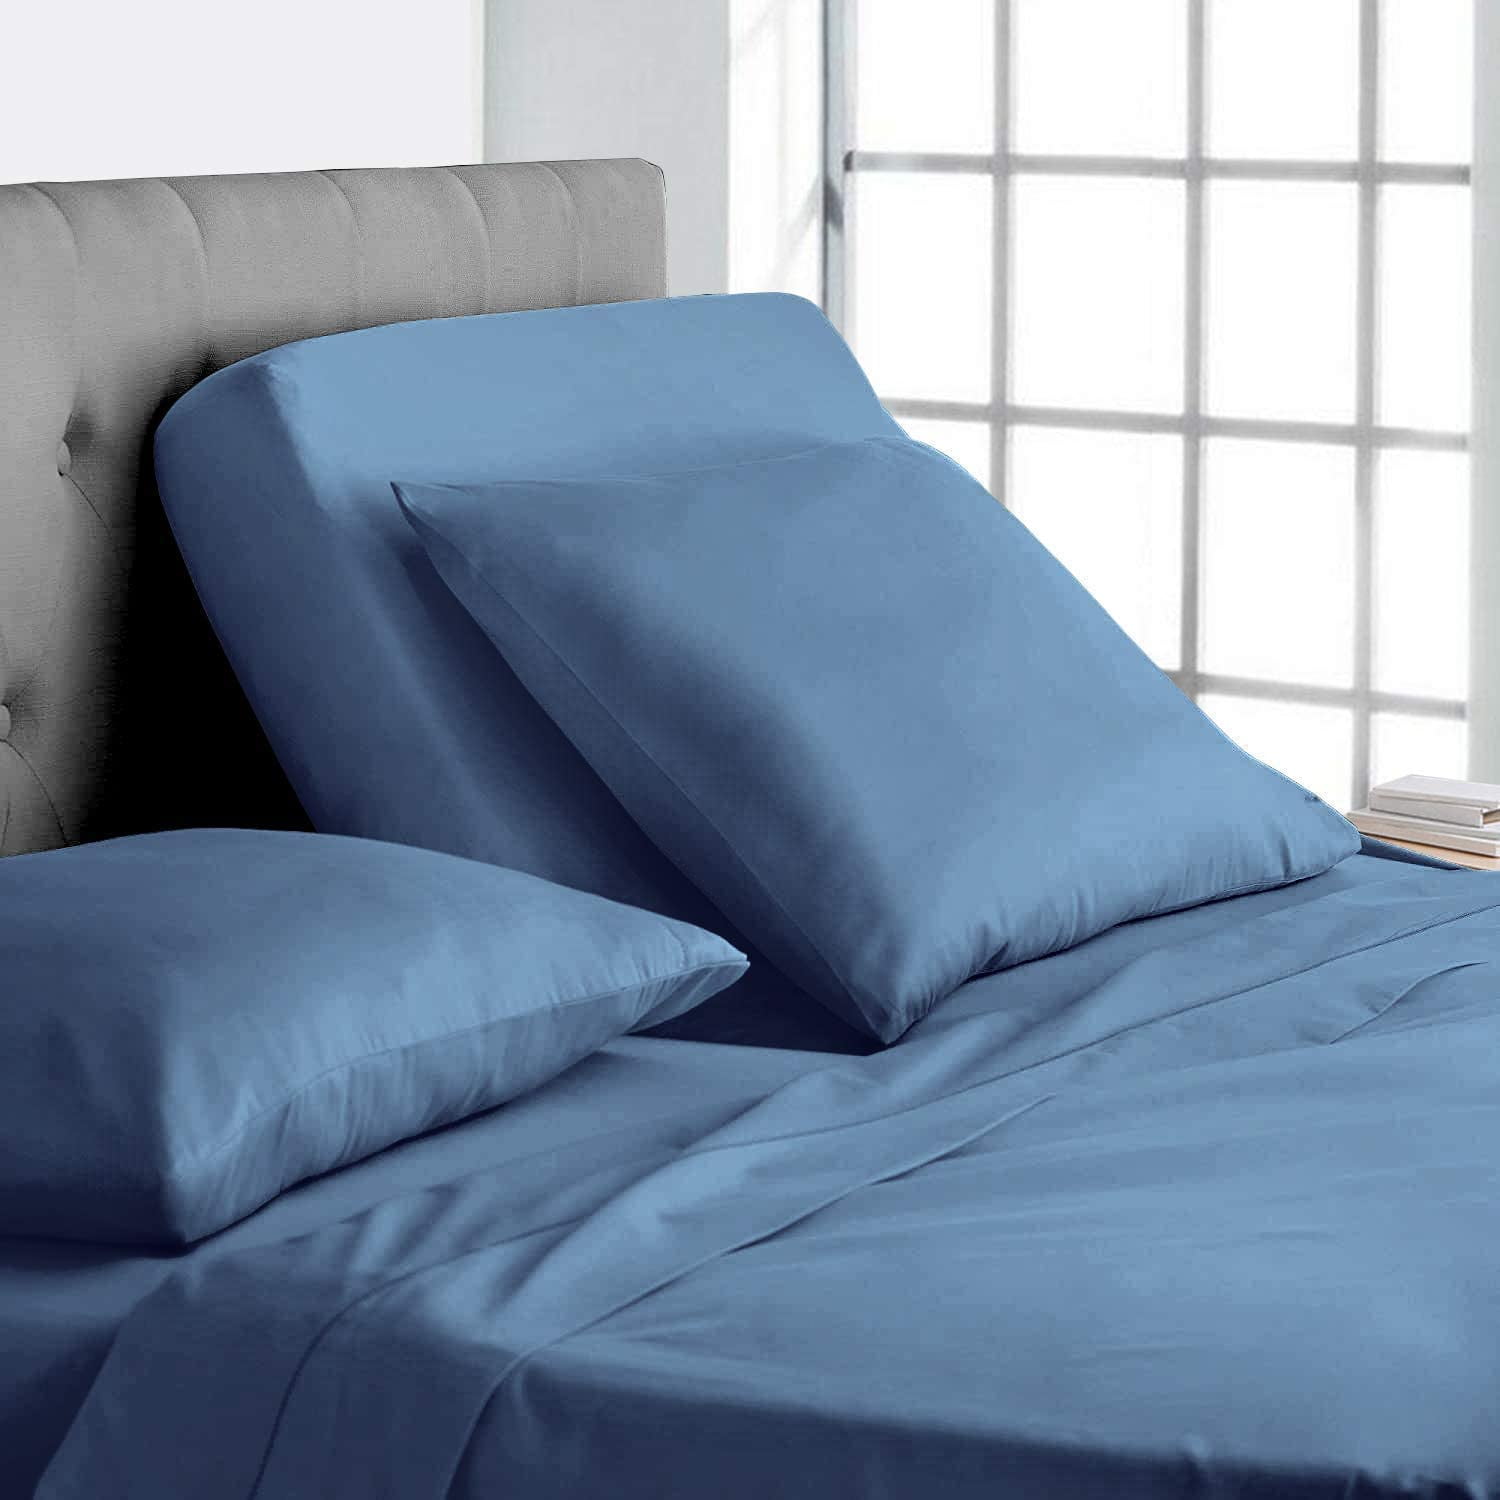 NEW BED SHEET SET QUEEN SIZE AQUA COLOR 800 THREAD COUNT 100% EGYPTIAN COTTON 